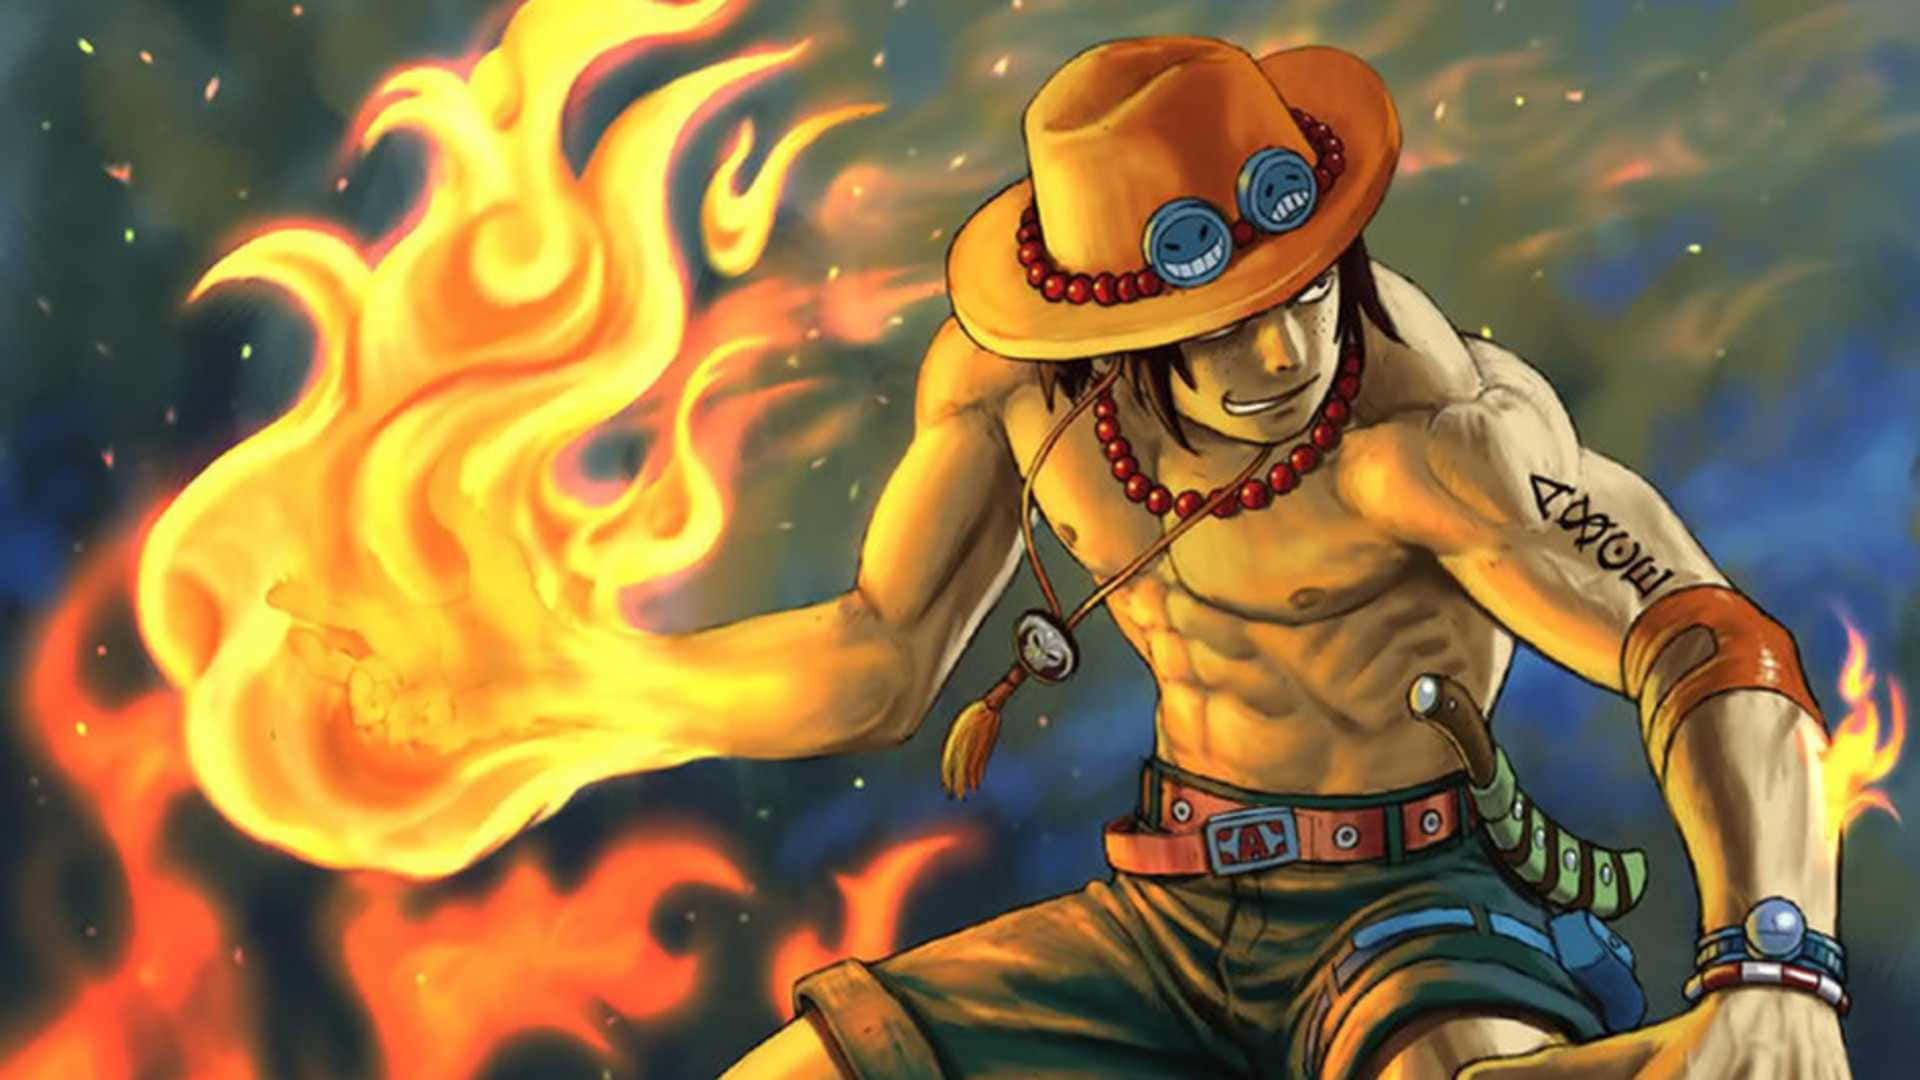 Portgas D Ace, The Legendary One Piece Pirate